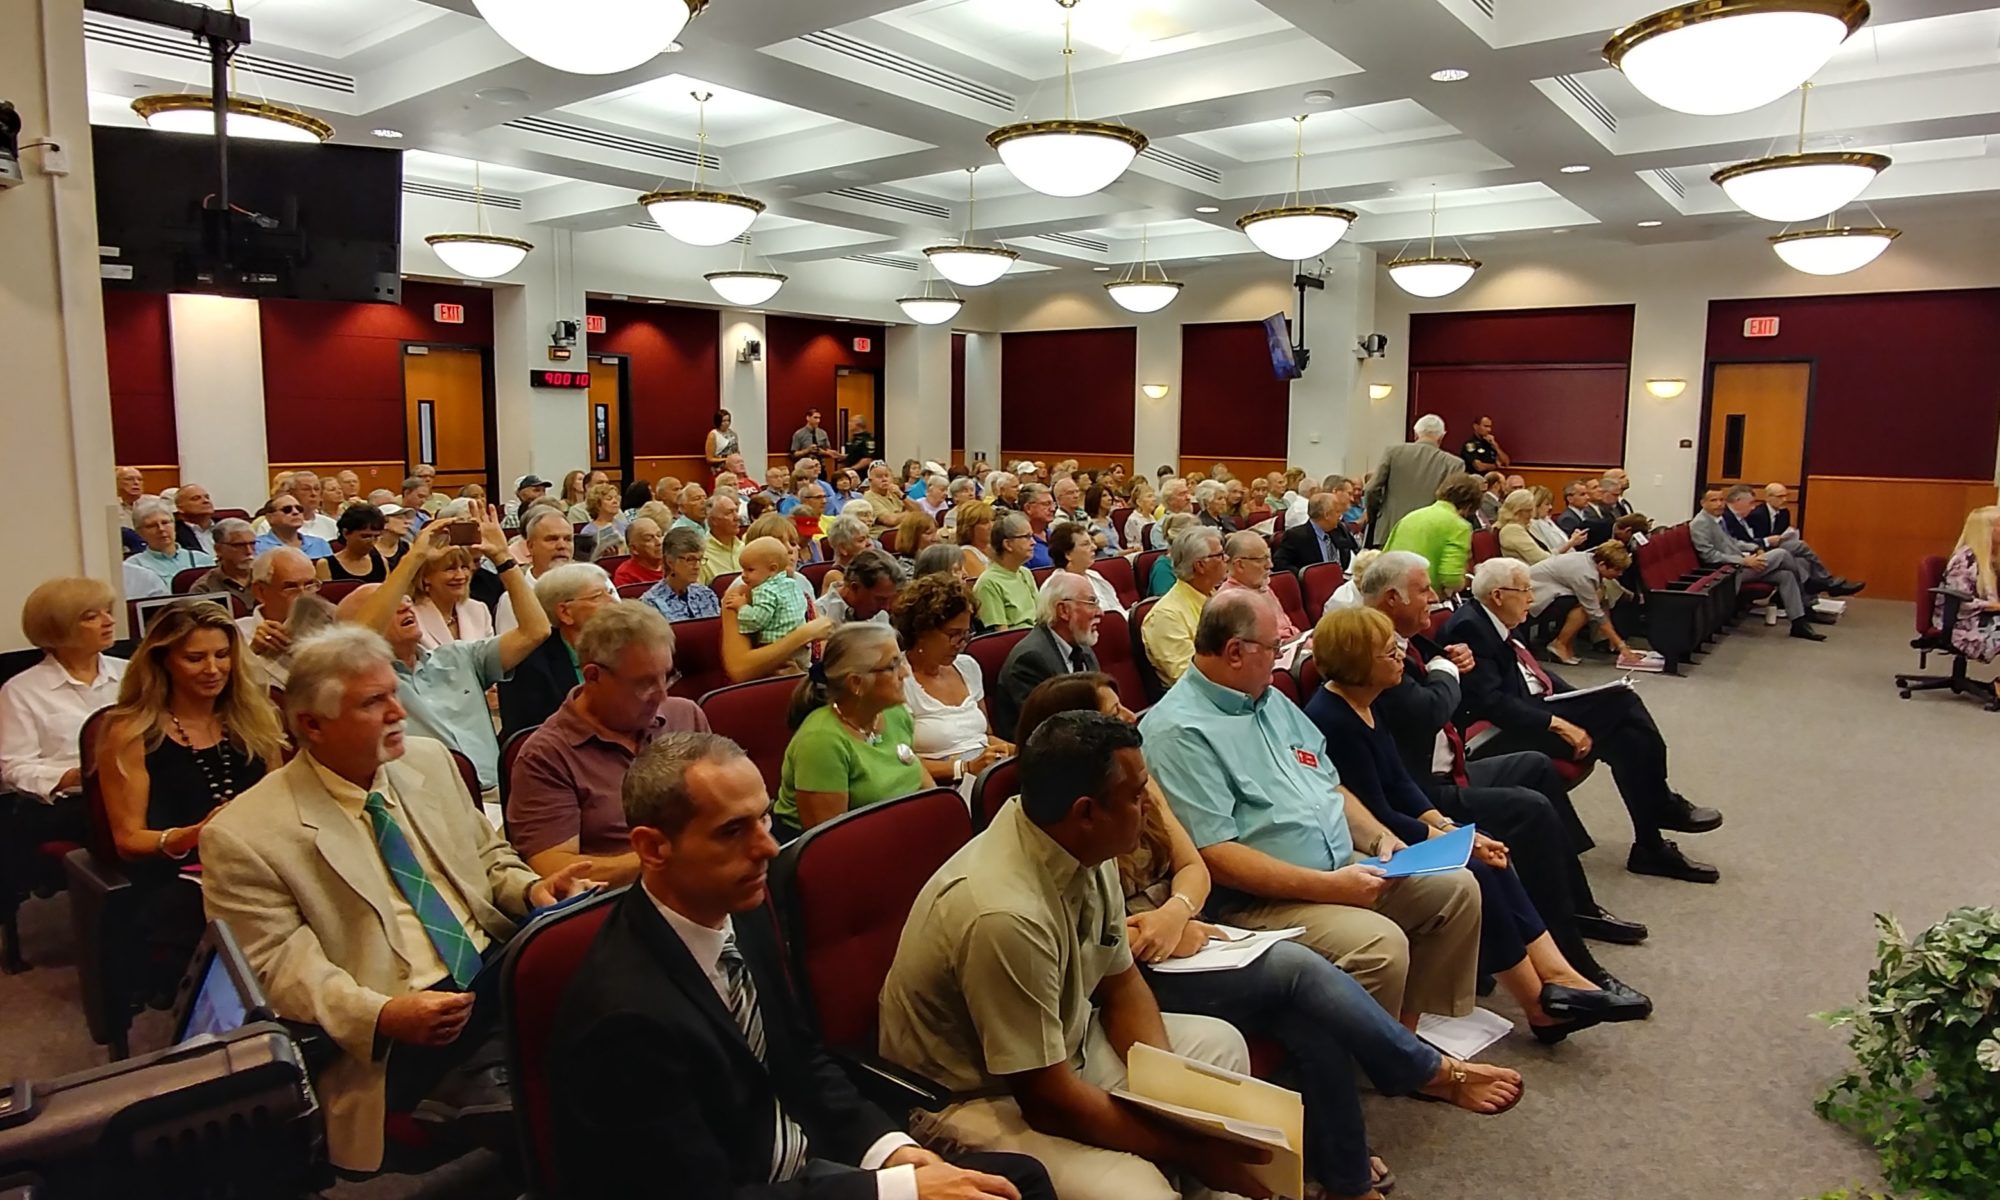 Photo of the people in attendance at the County Commission Hearing today